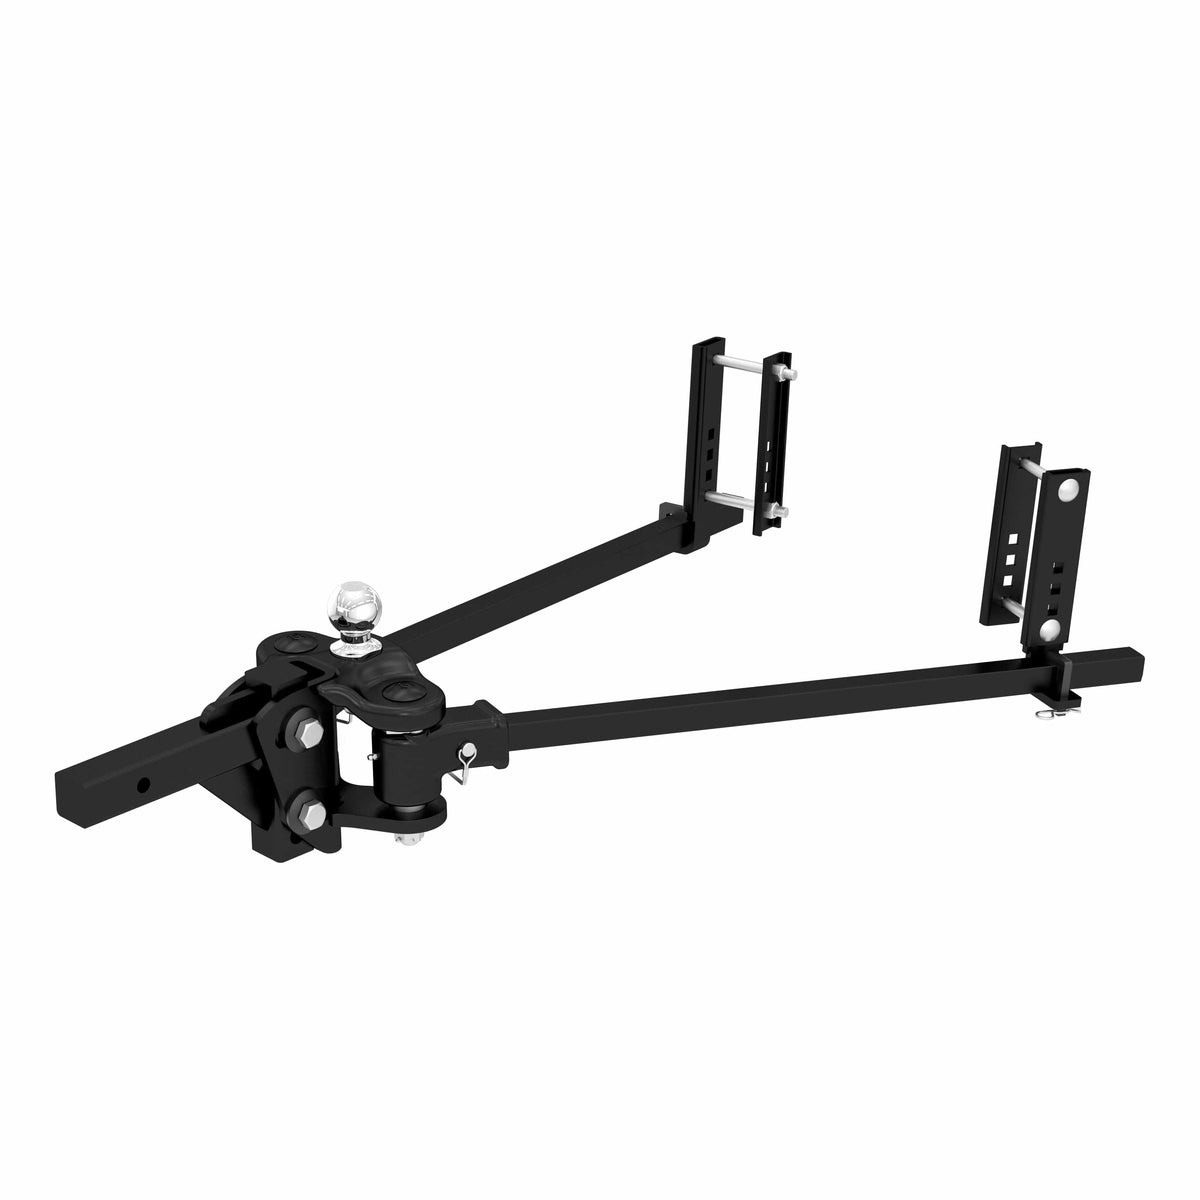 CURT Truck Freight - Not Qualified for Free Shipping CURT TruTrack Weight Distribution Hitch with Sway Control up to 15K #17501